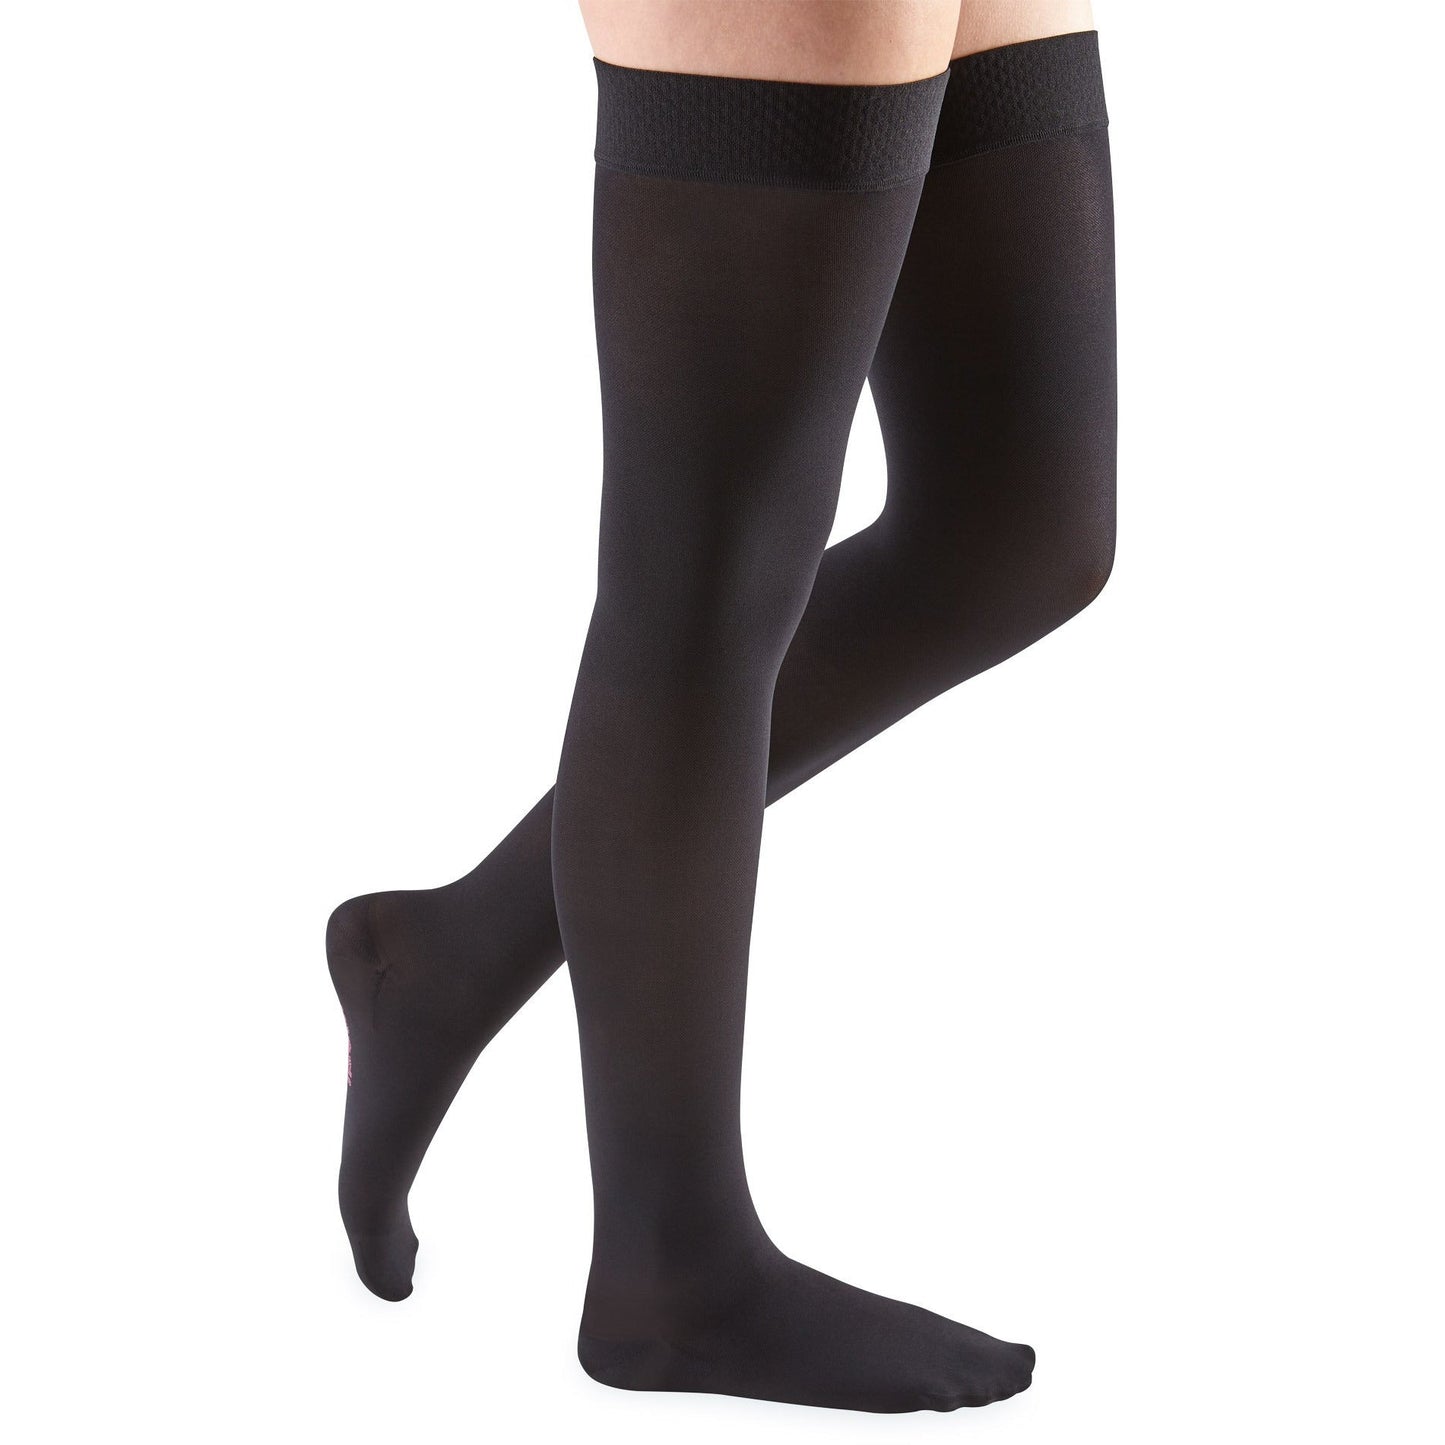 Mediven Comfort Thigh High 30-40 mmHg w/ Beaded Silicone Top Band [OVERSTOCK]